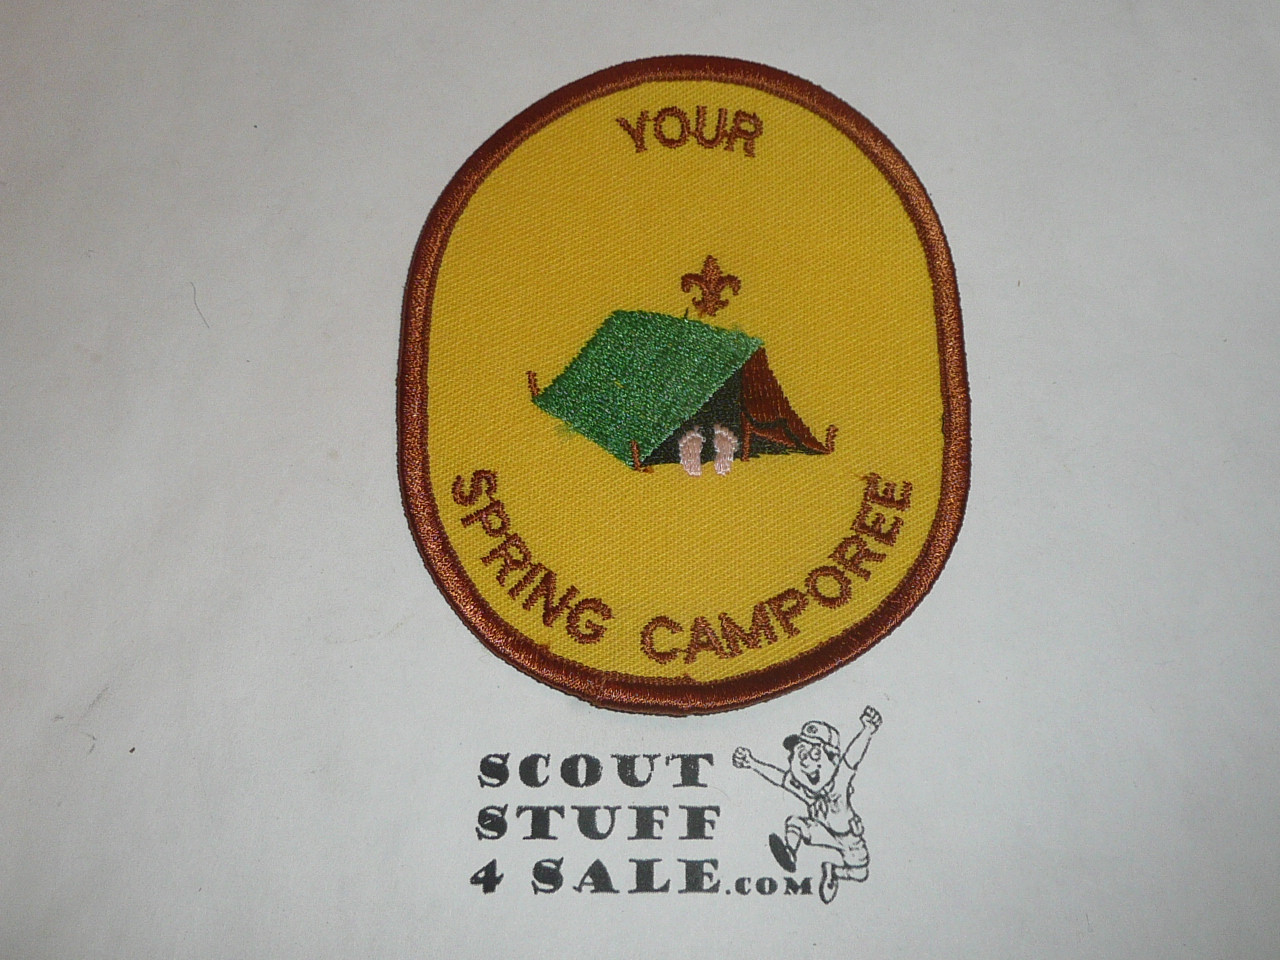 Your Council Name Sample Patch, Spring Camporee, tent